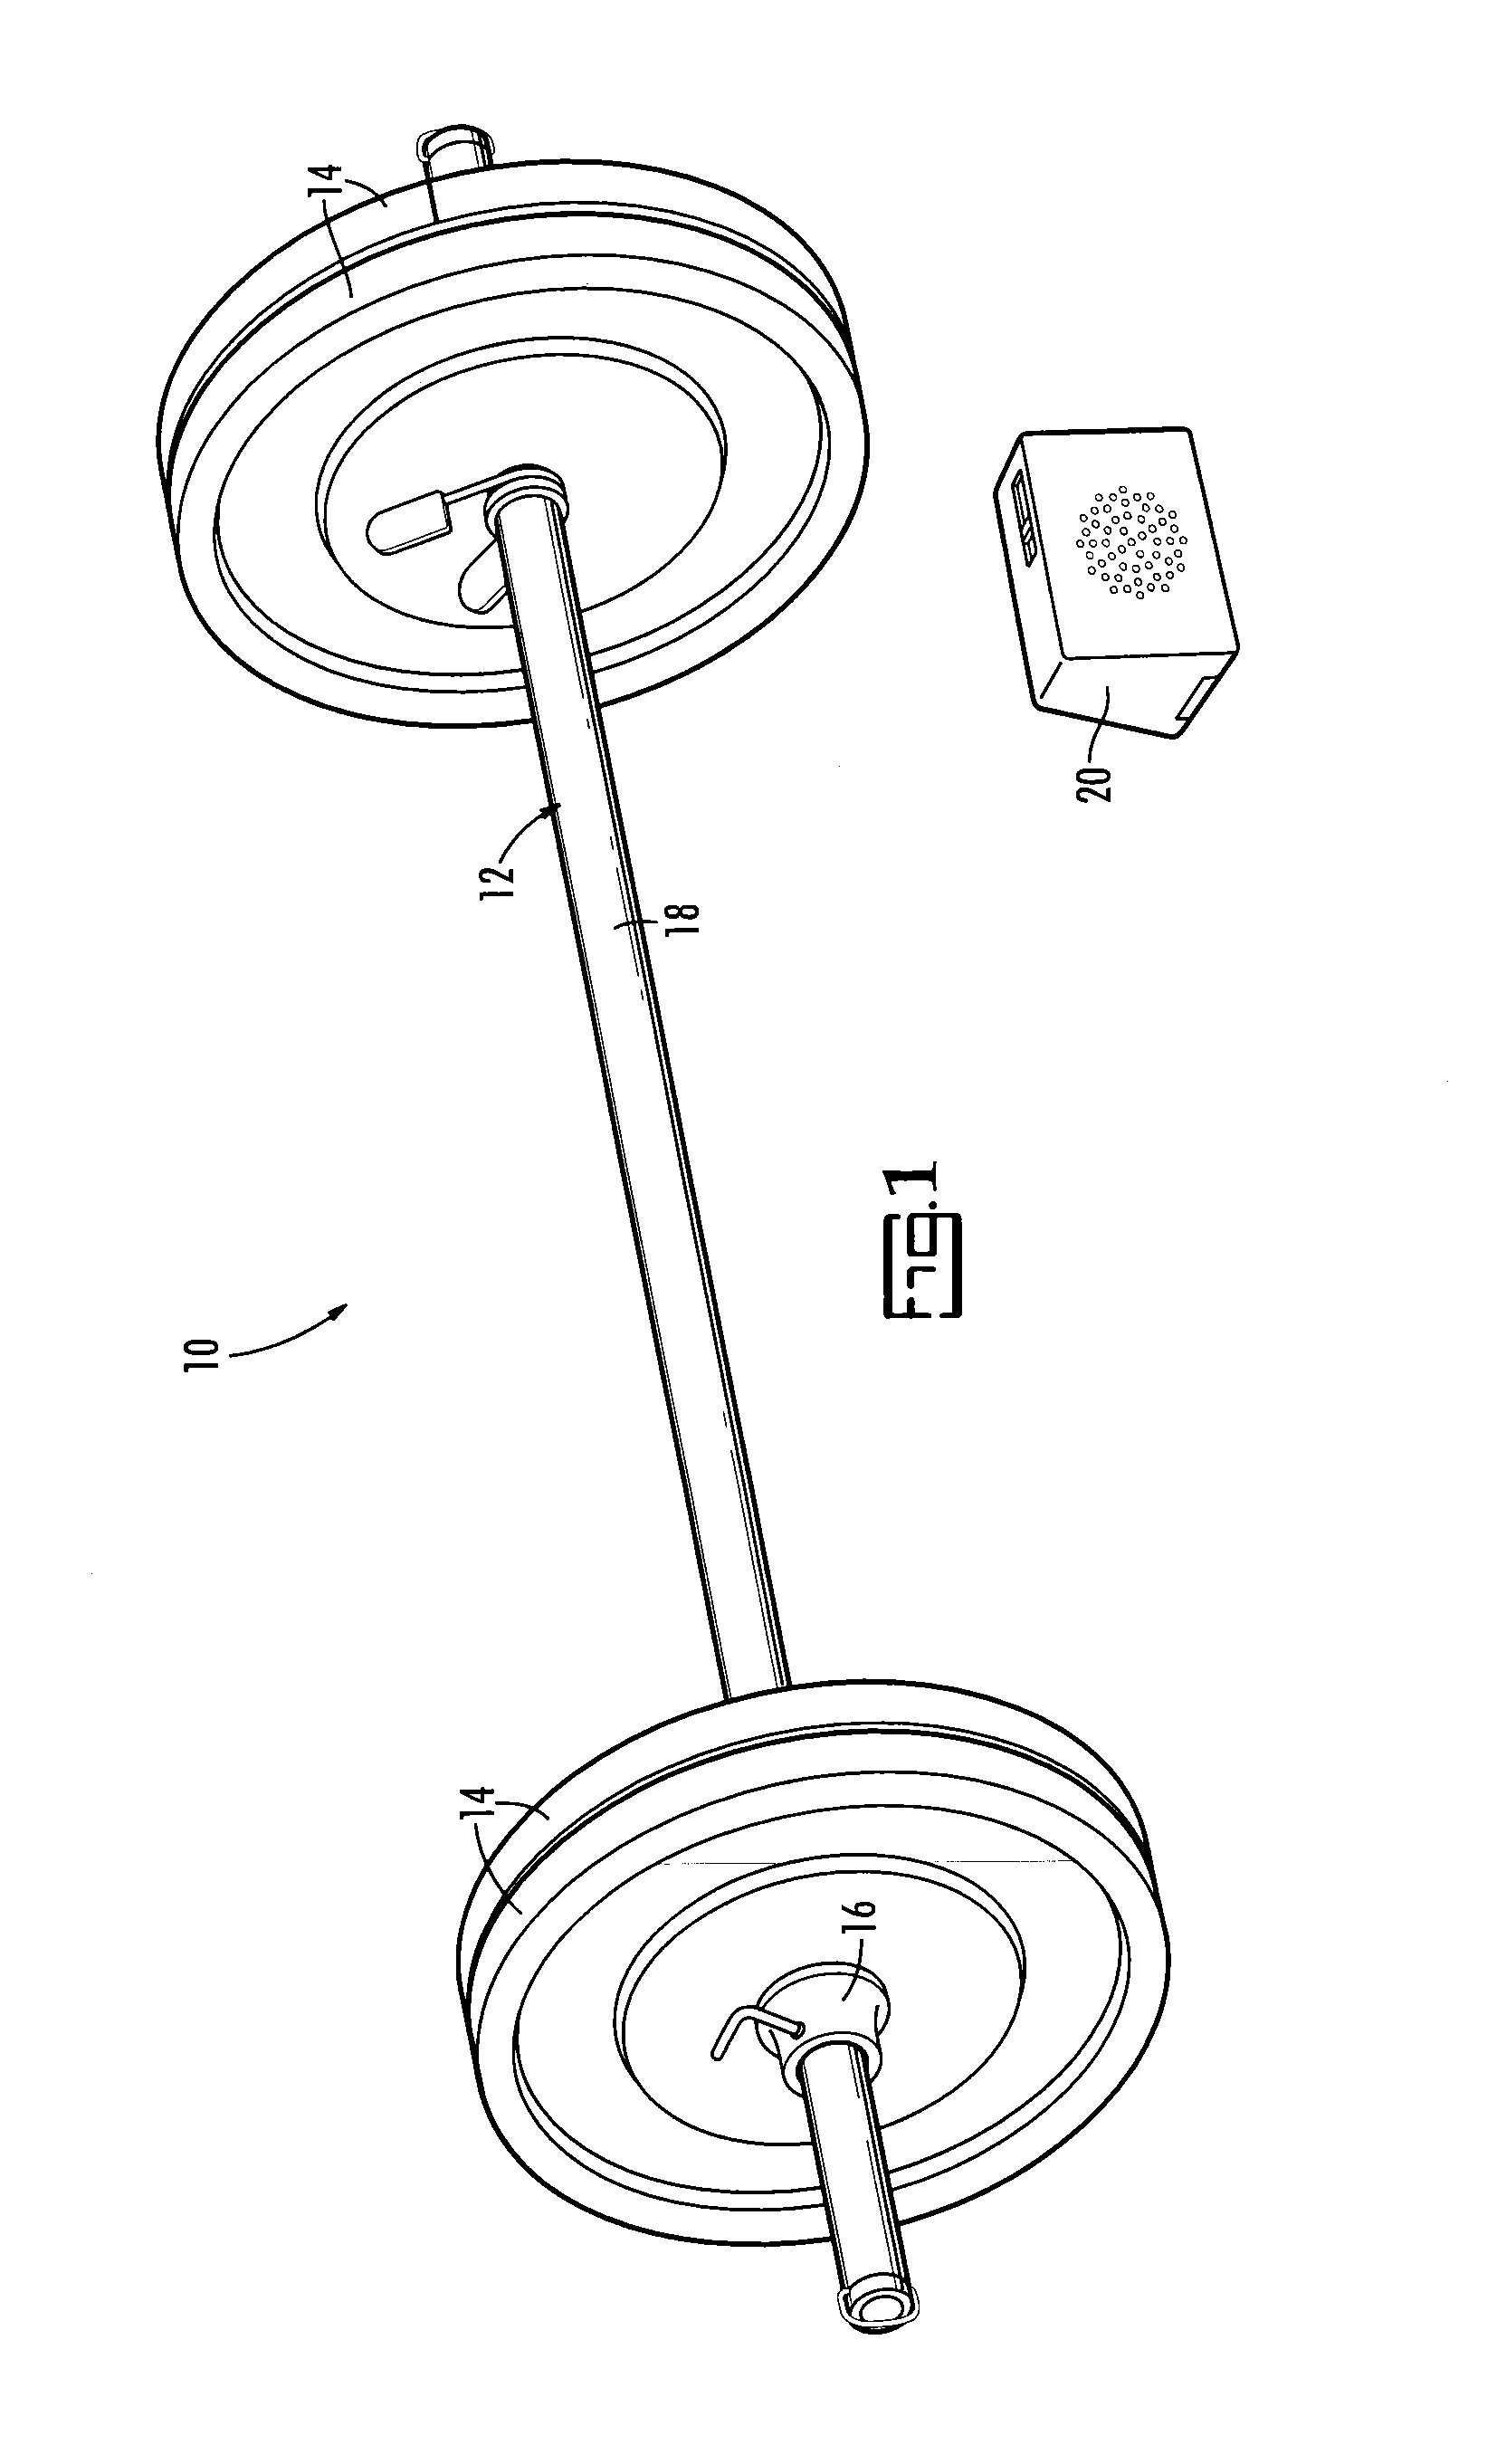 Apparatus And Methods Of Using A Flexible Barbell For Enhancing The Benefits Of Weightlifting